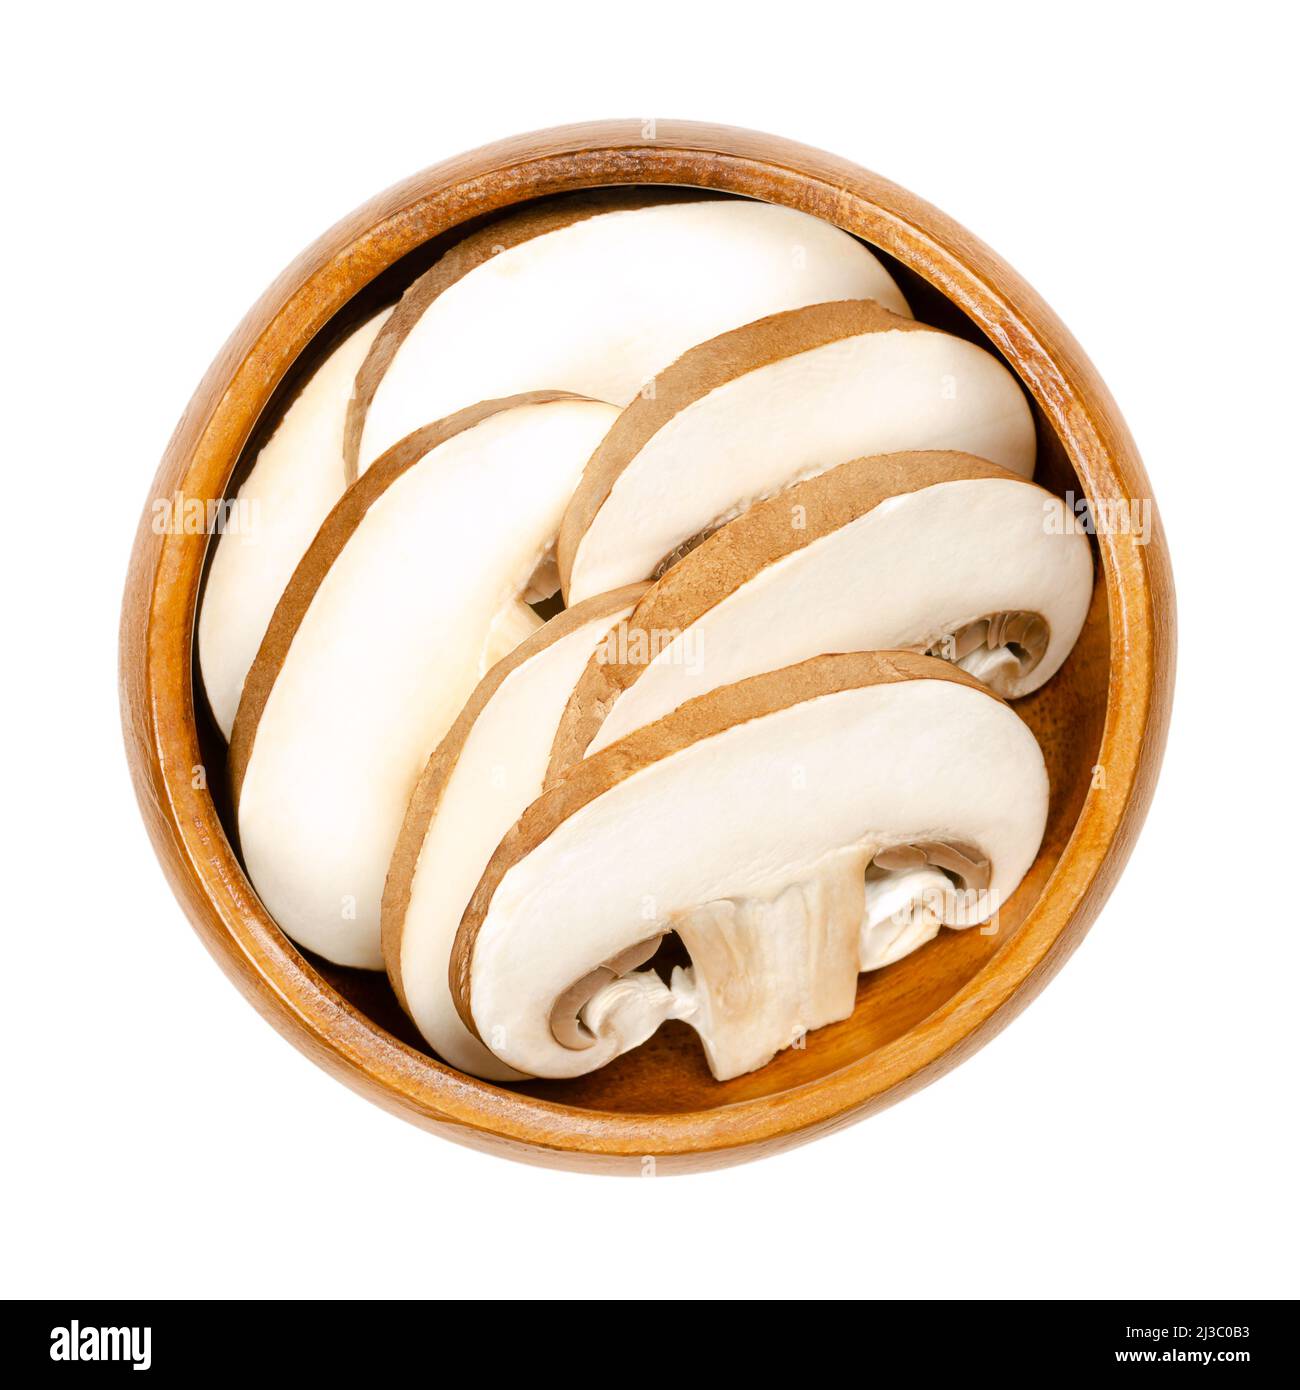 Brown champignons, sliced raw and young mushrooms in a wooden bowl. Agaricus bisporus, known as Swiss, Roman or Italian brown mushroom. Stock Photo